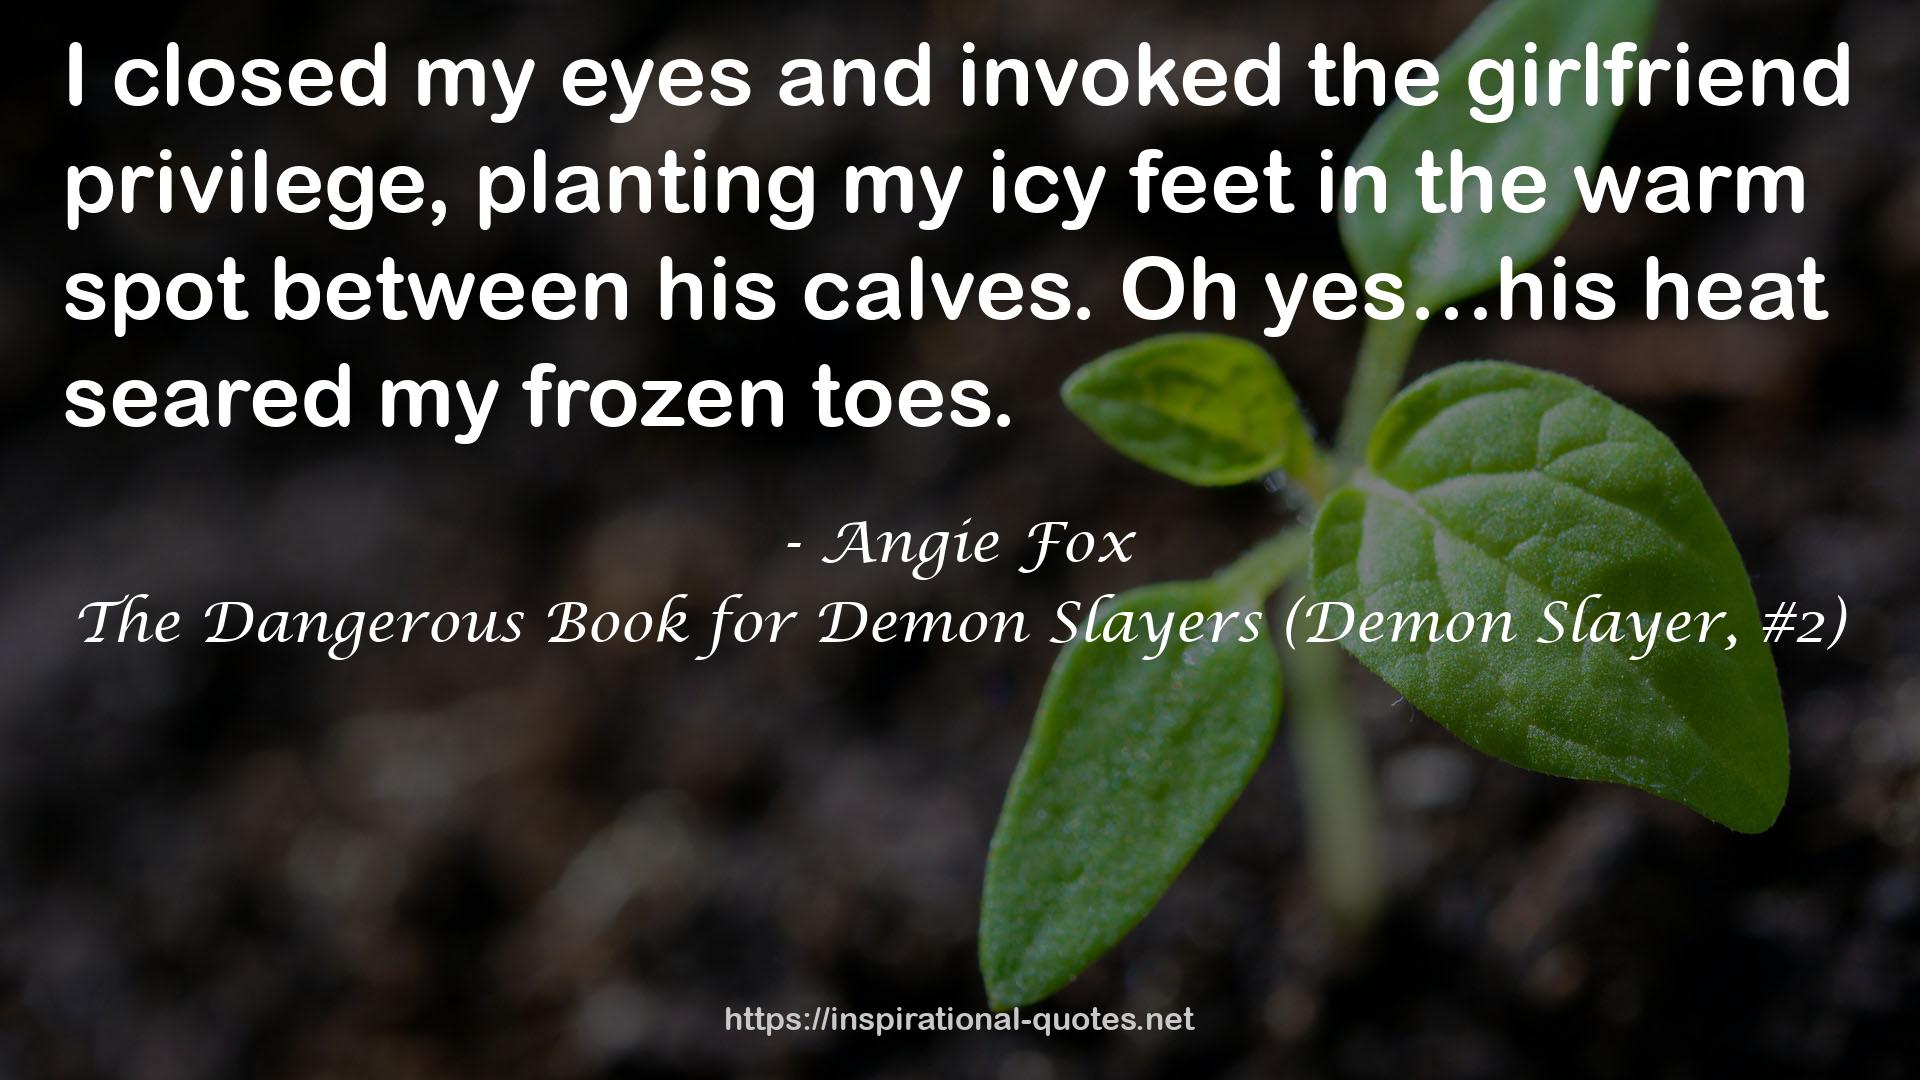 The Dangerous Book for Demon Slayers (Demon Slayer, #2) QUOTES